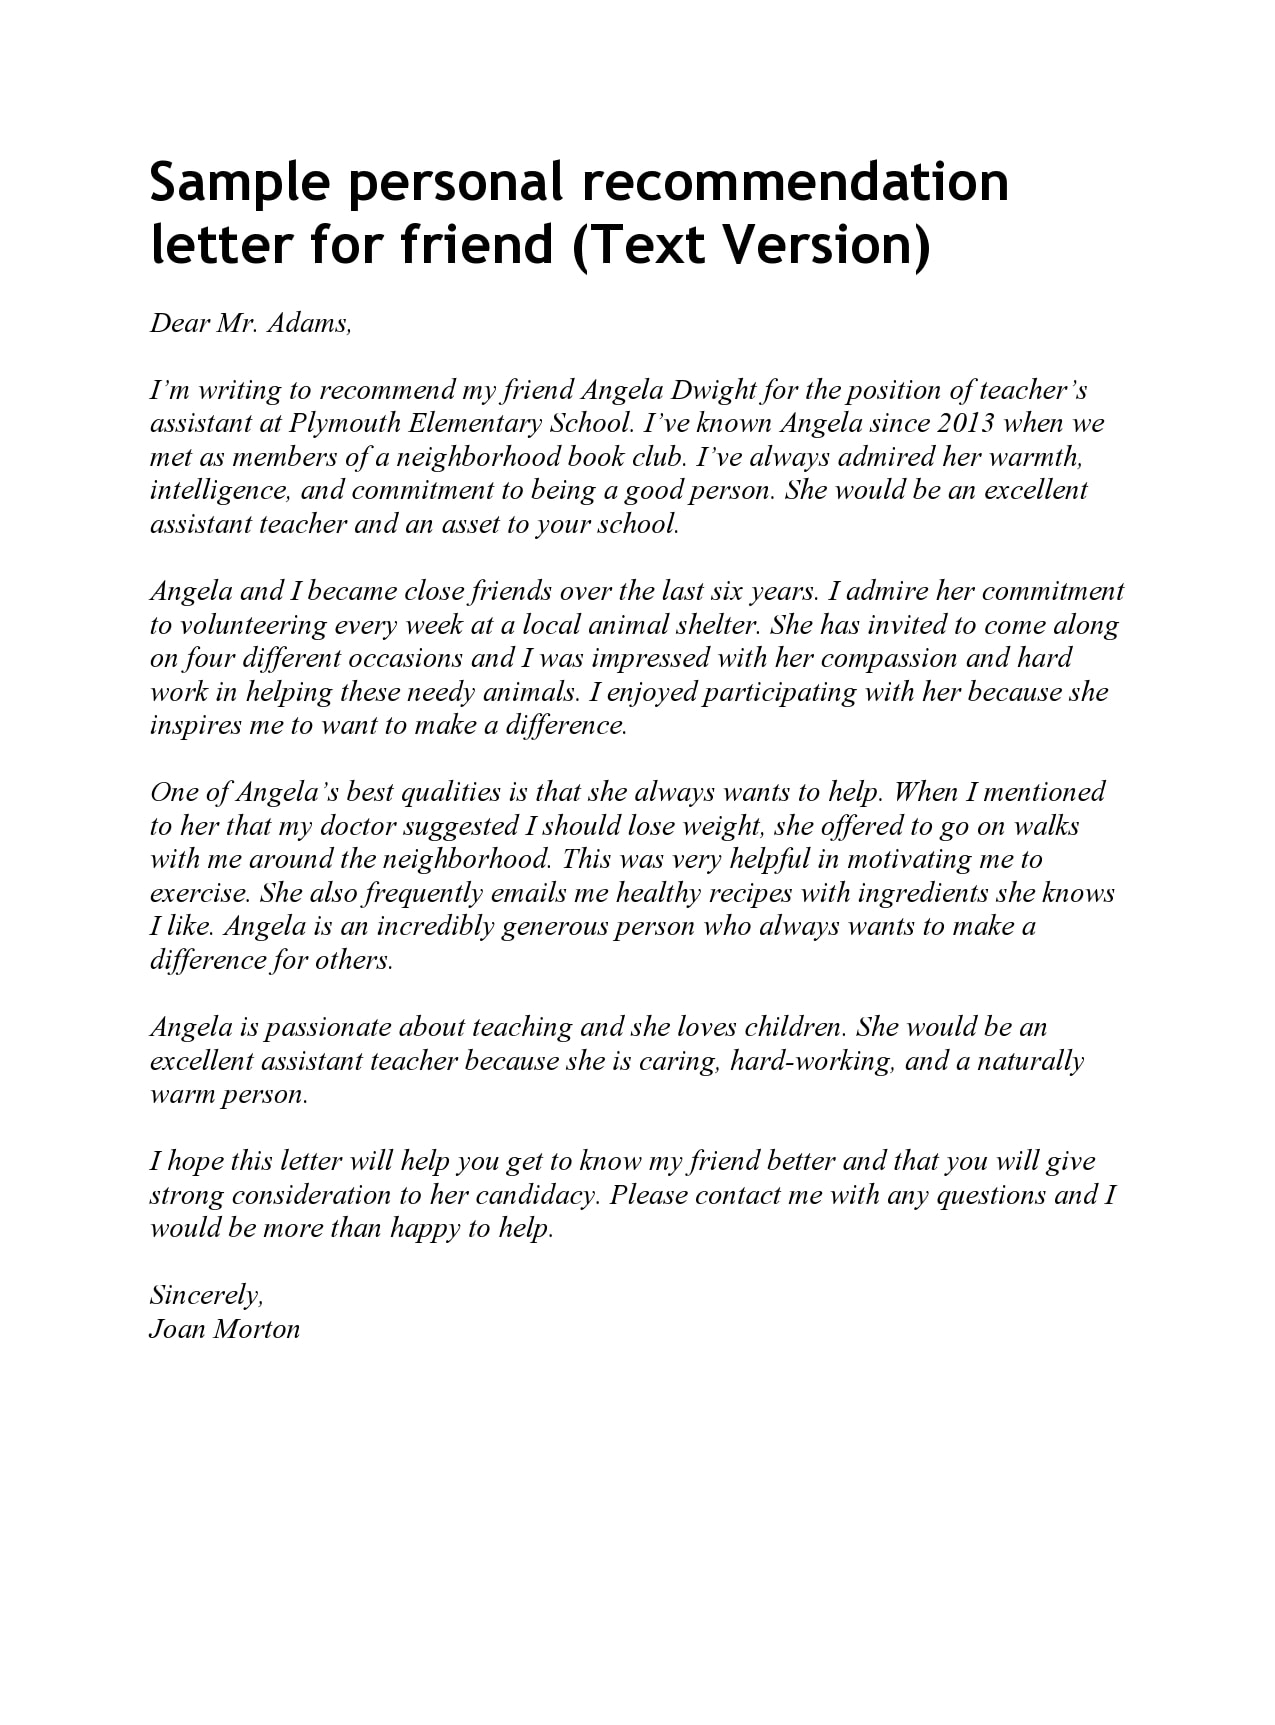 Job Recommendation Letter Sample For A Friend